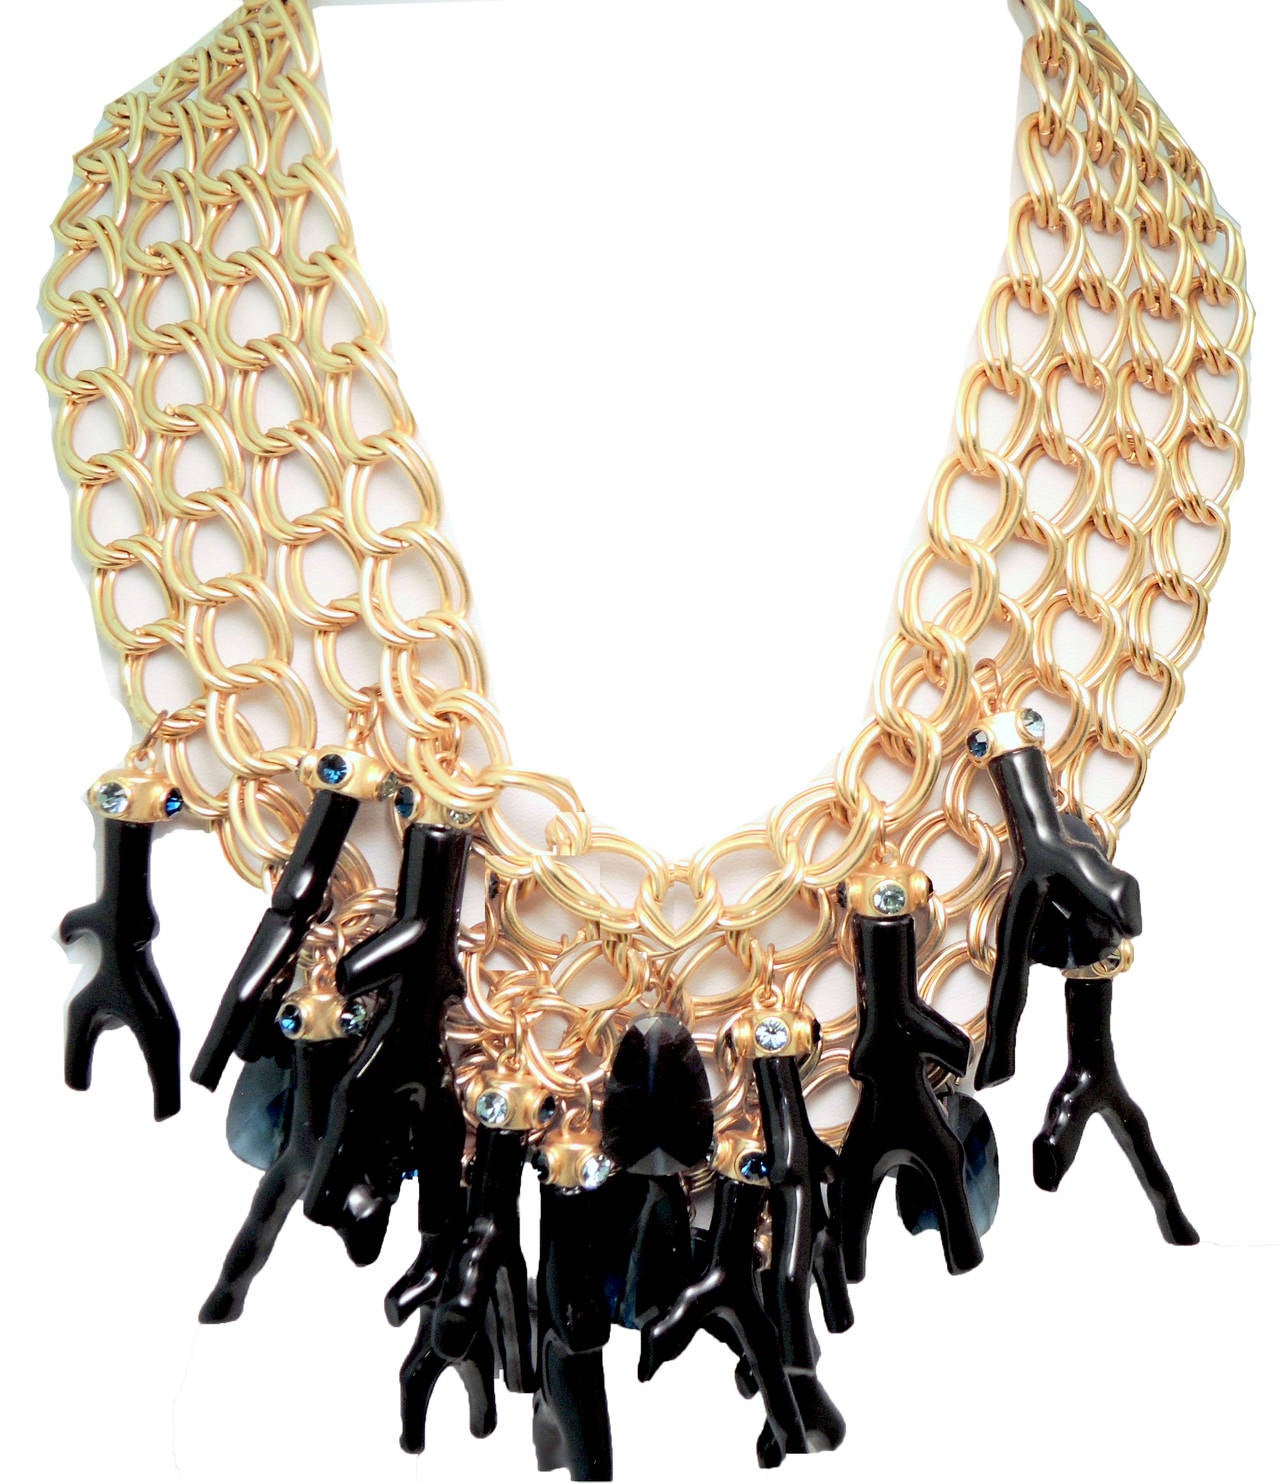 This vintage signed Oscar de la Renta necklace features multiple faux coral shaped black branches.  It also has bezel cut teardrop sapphire blue glass stones with sapphire and blue color rhinestone accents.  They all cascade down from a wide golden